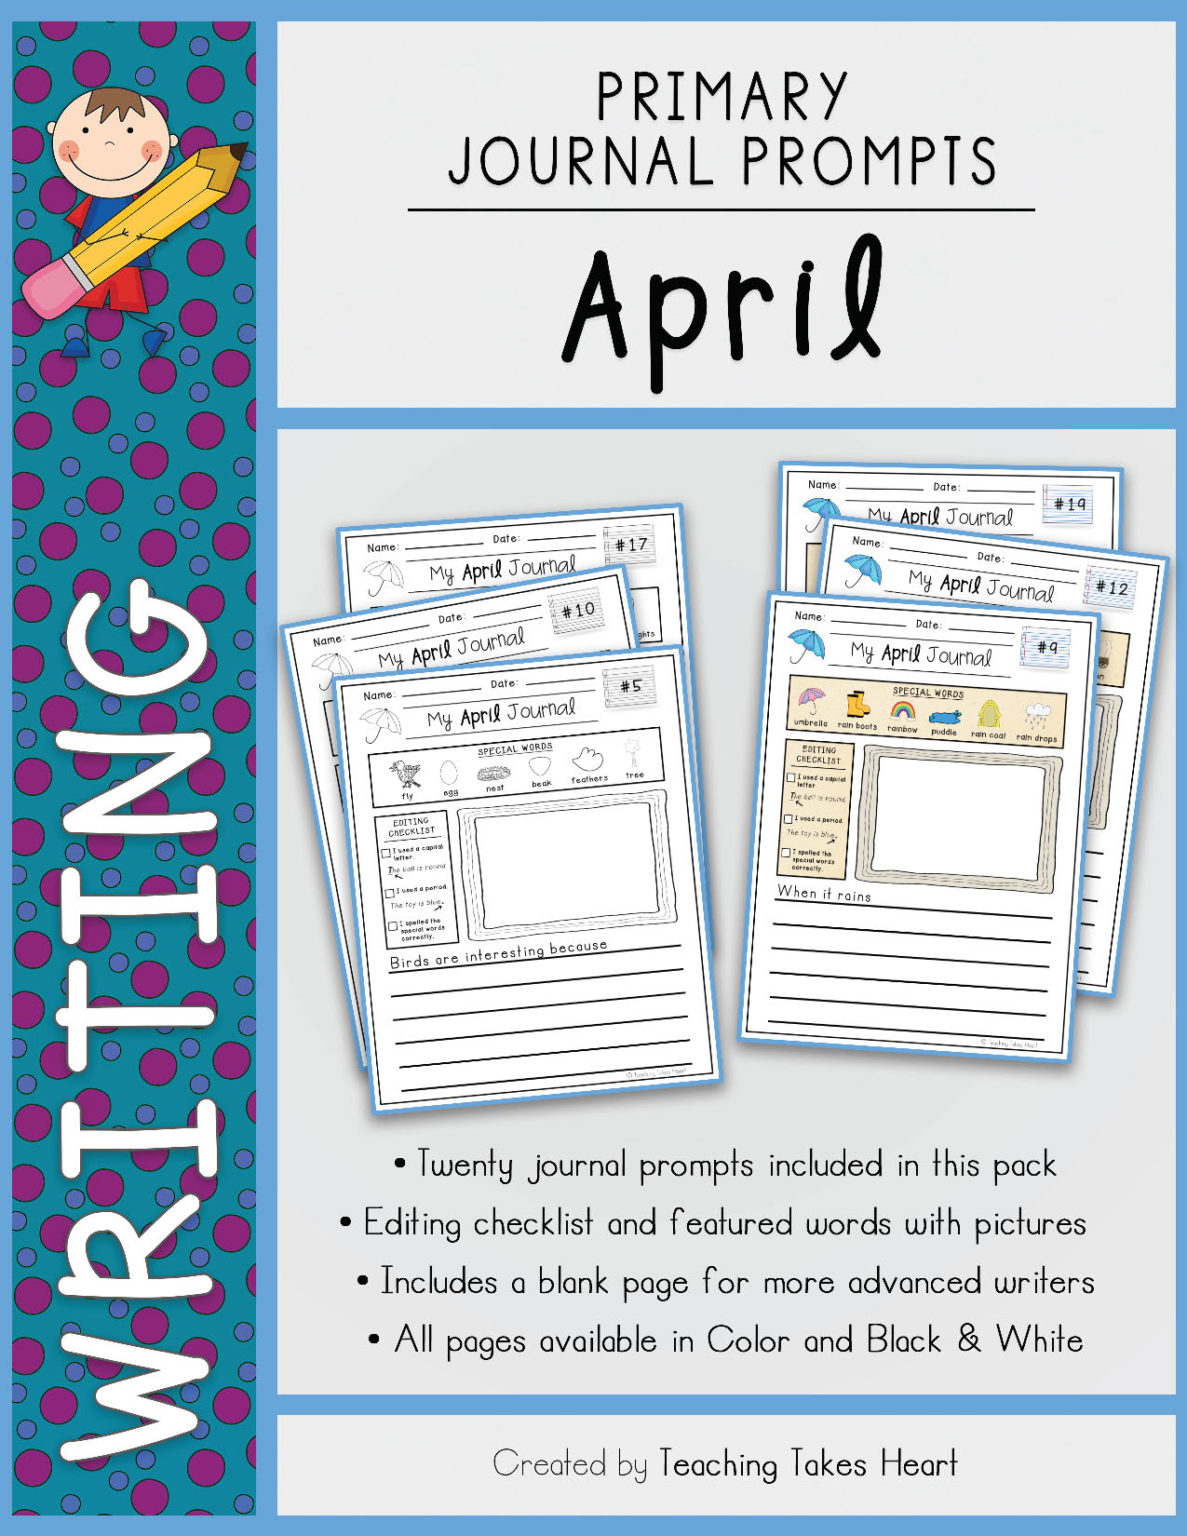 FREE PRIMARY WRITING JOURNAL PROMPTS: April - Teaching Takes Heart